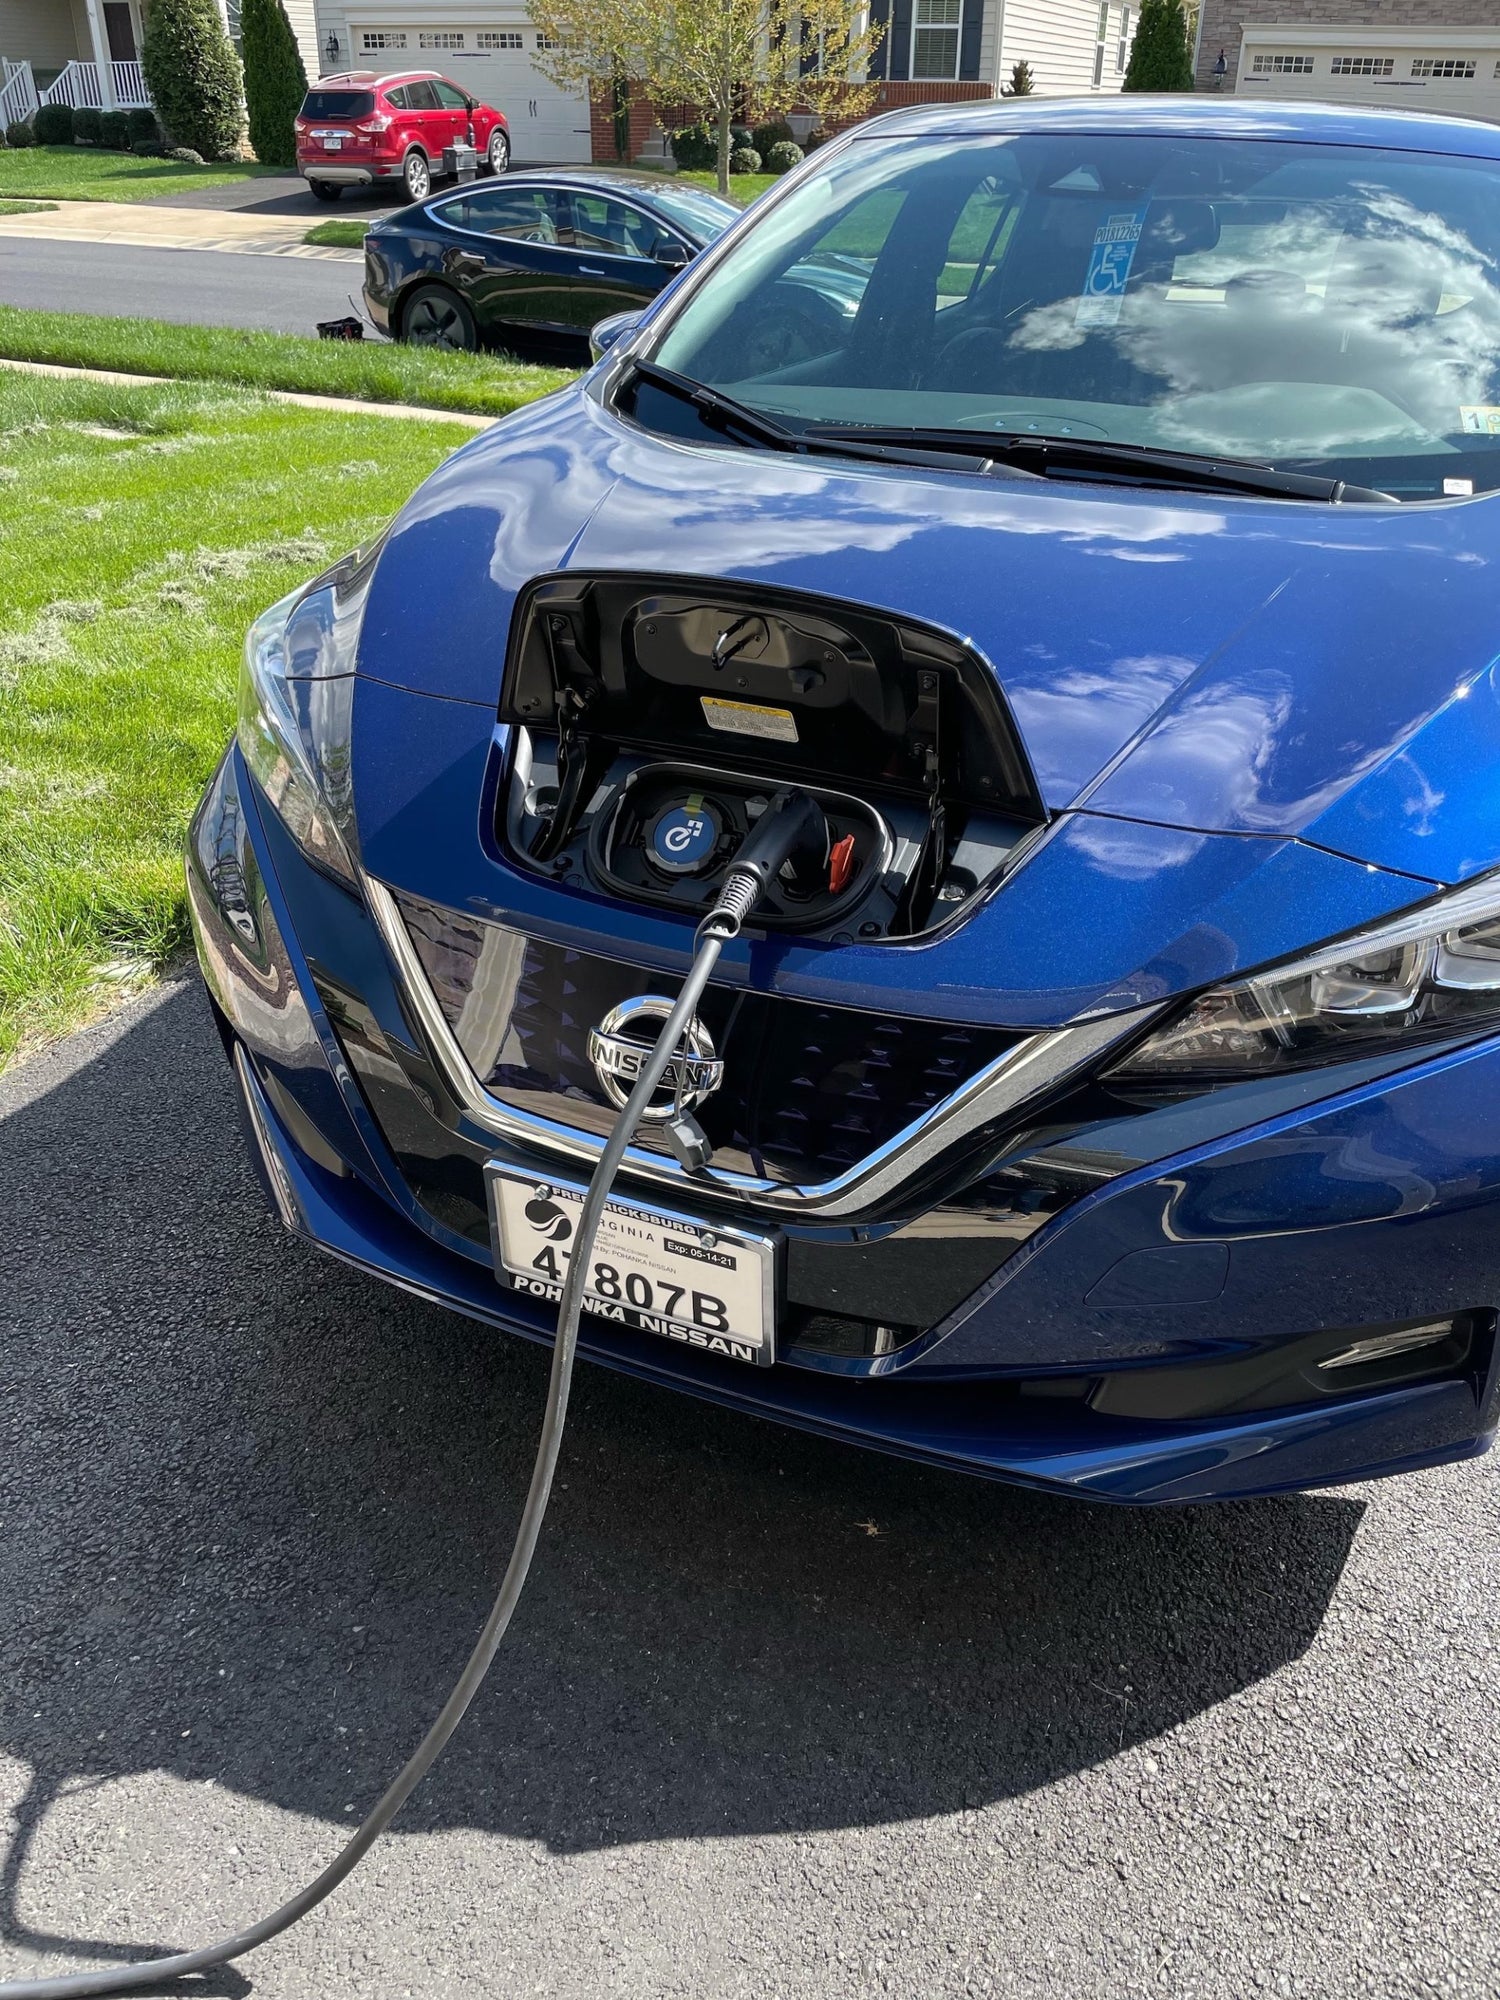 Electric vehicle Nissan charging. Garage Charge at home electric vehicle EV charging station installation. Free consultation for EV charger installation projects in Central Virginia, Richmond, Charlottesville, Harrisonburg, Lynchburg.